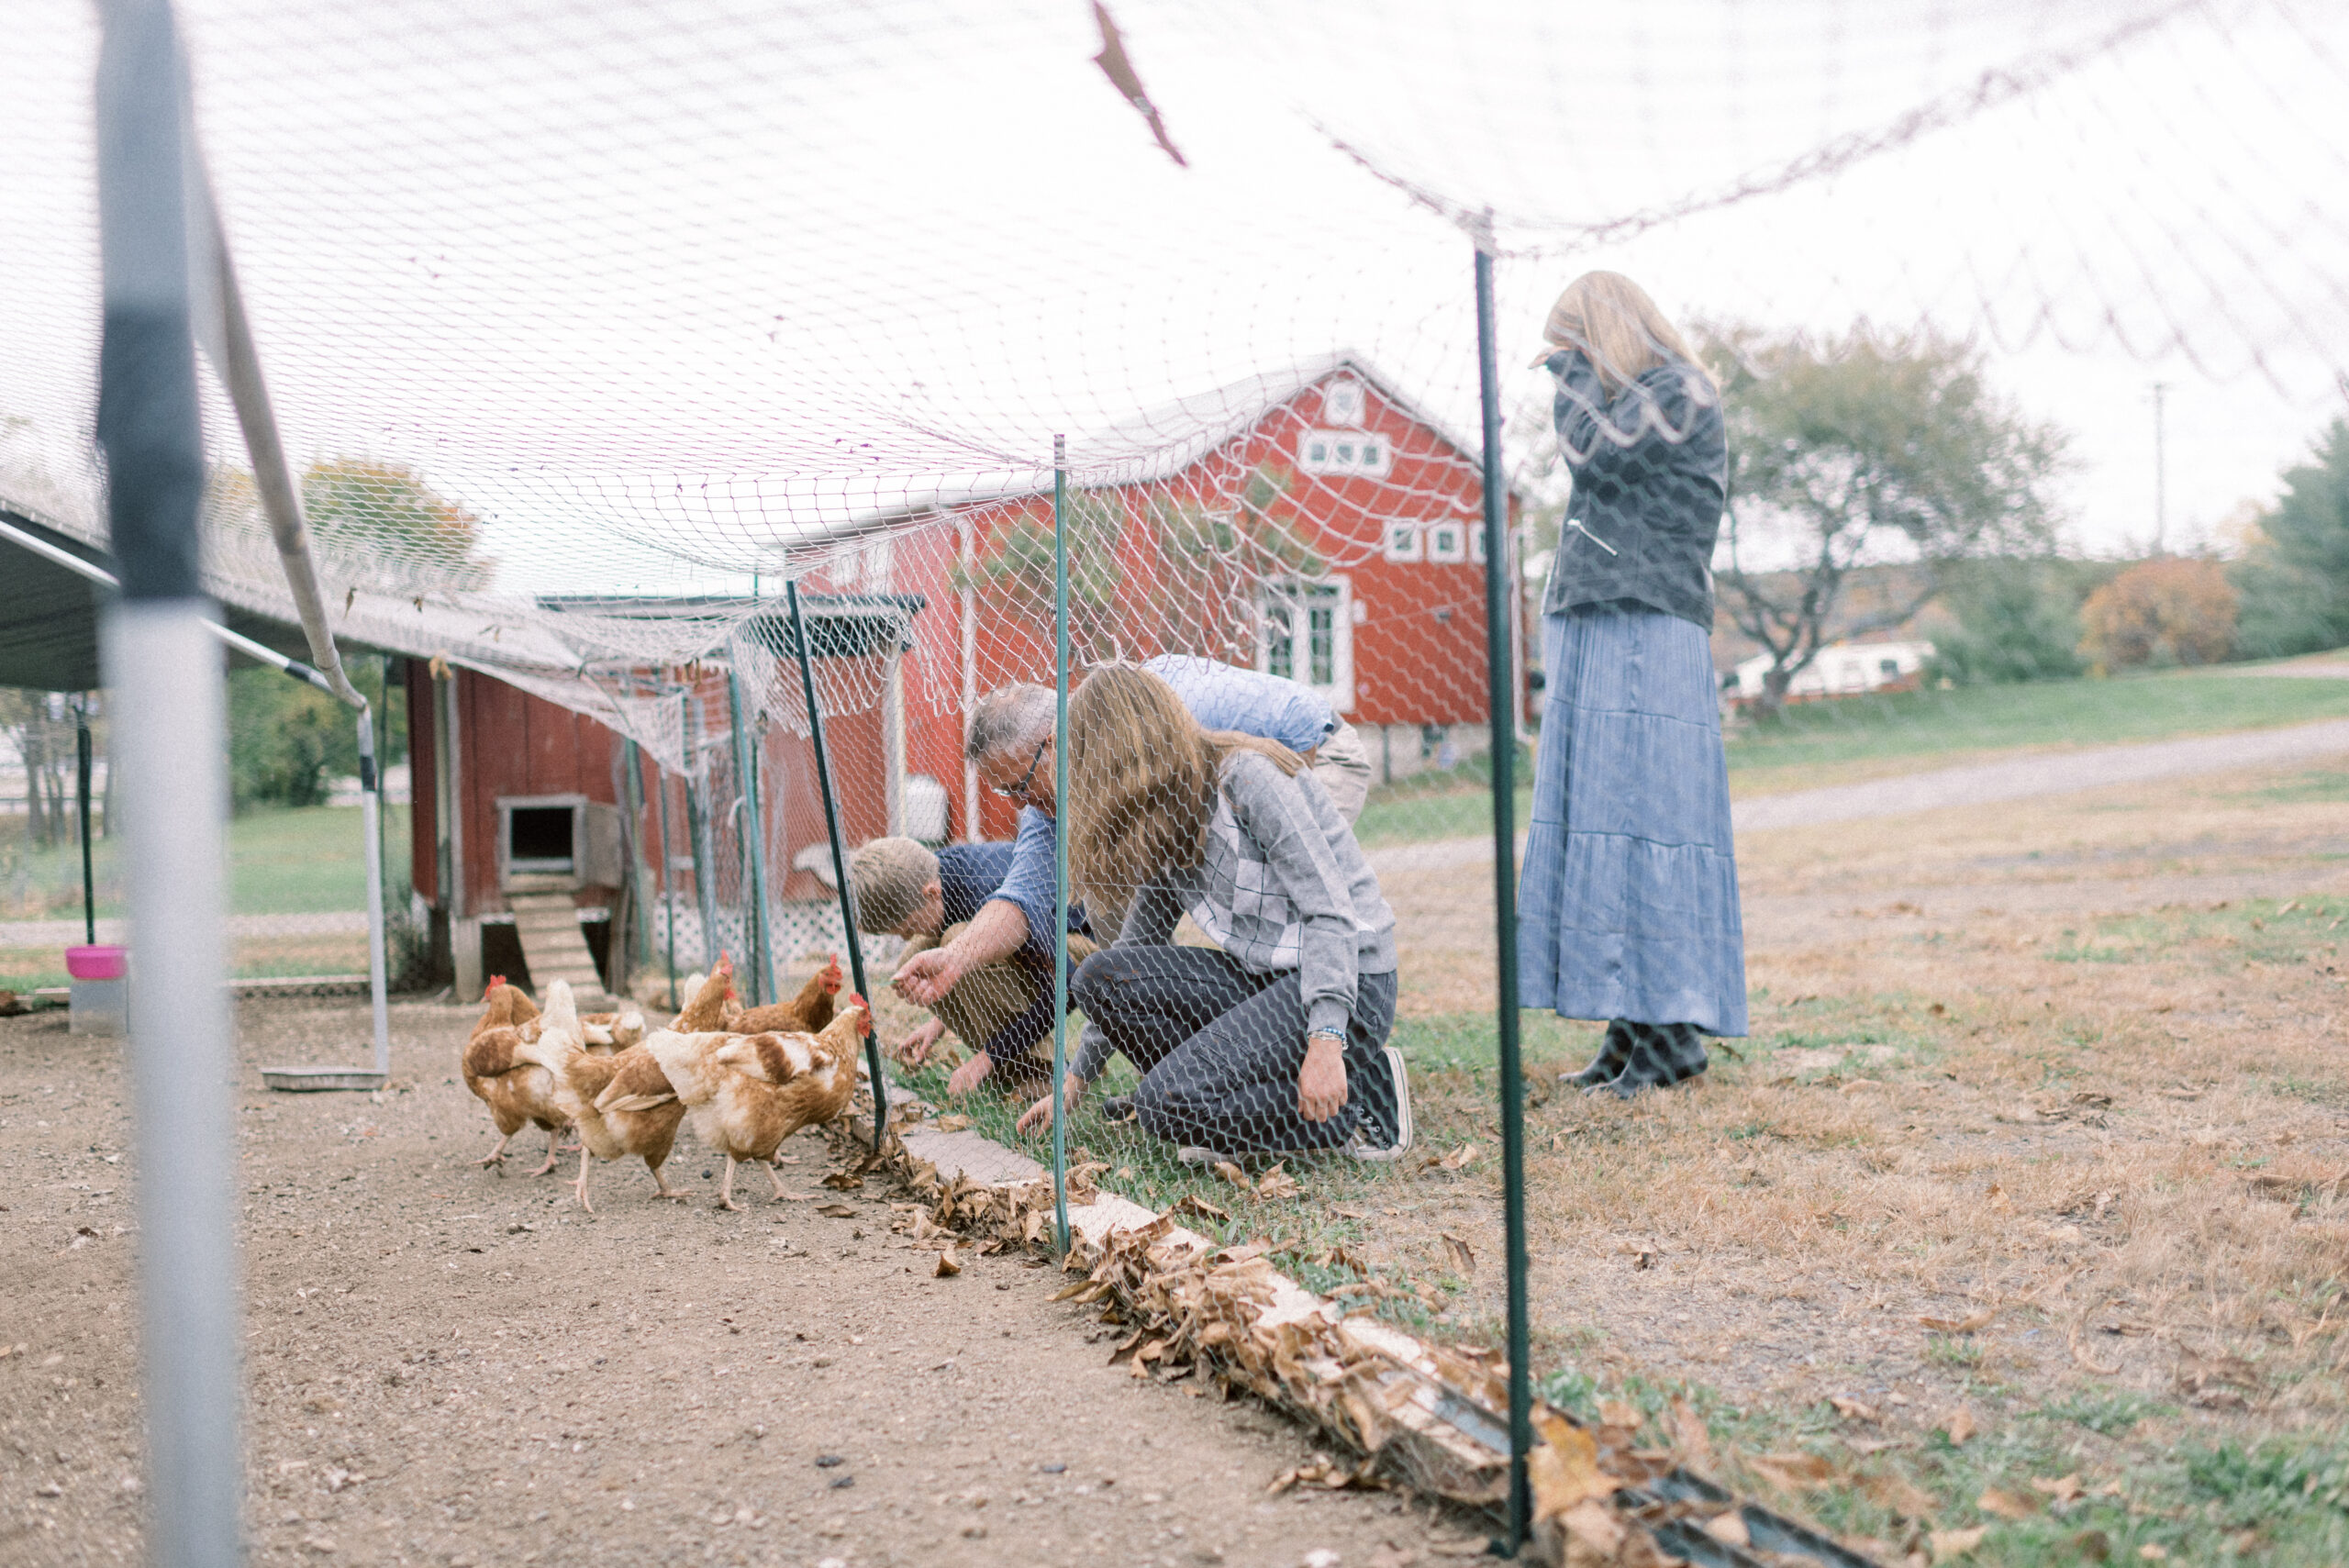 Pennsylvania photographer captures children playing with chickens